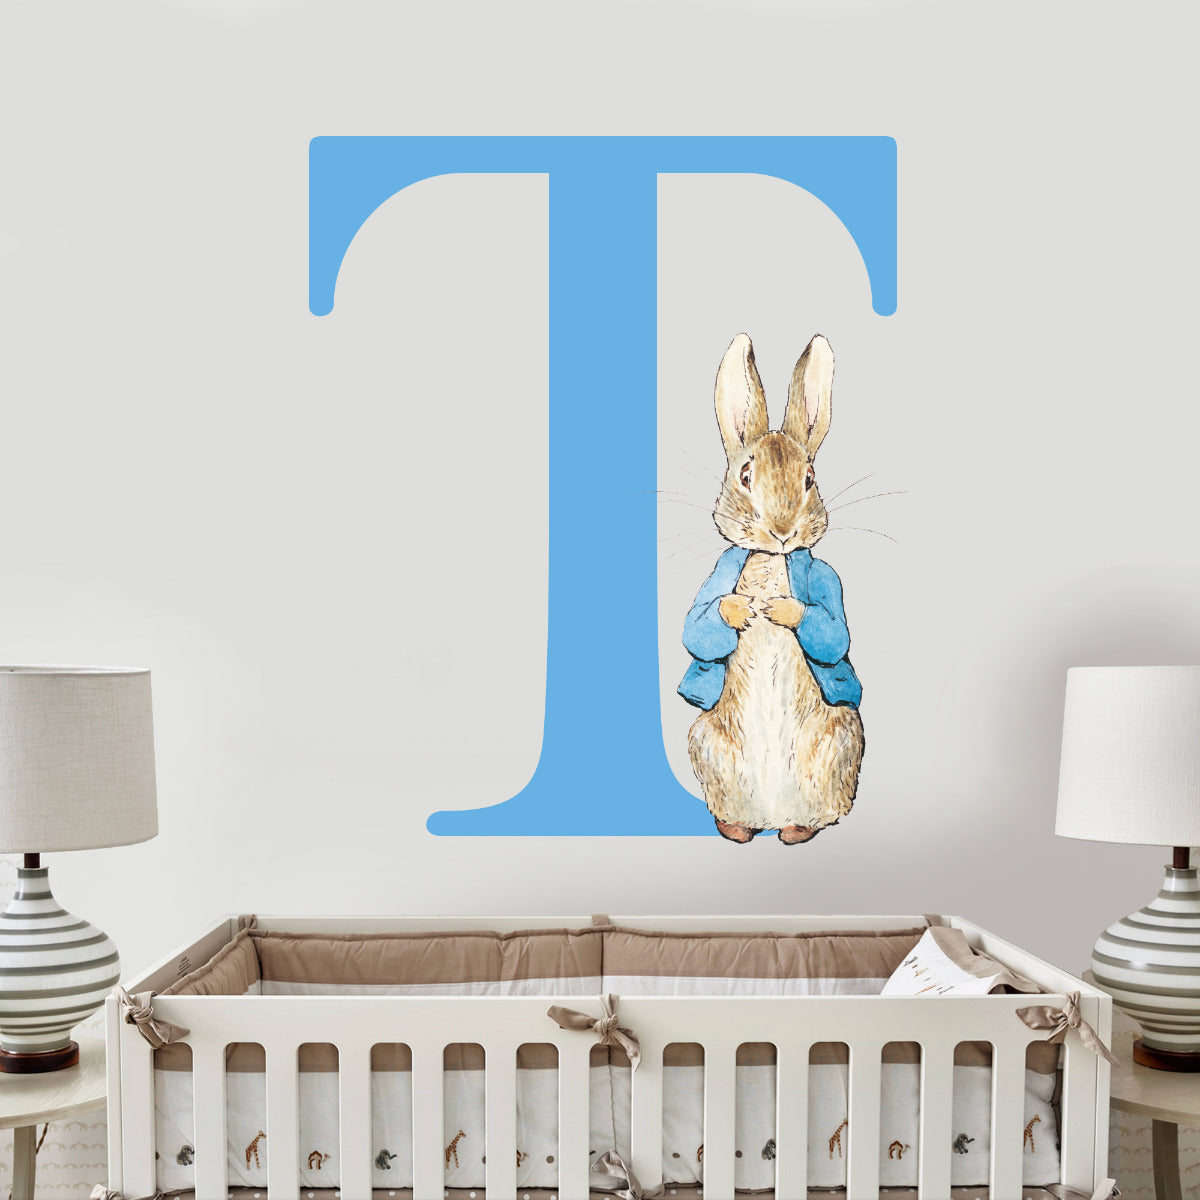 Peter Rabbit Letter Personalised Wall Sticker